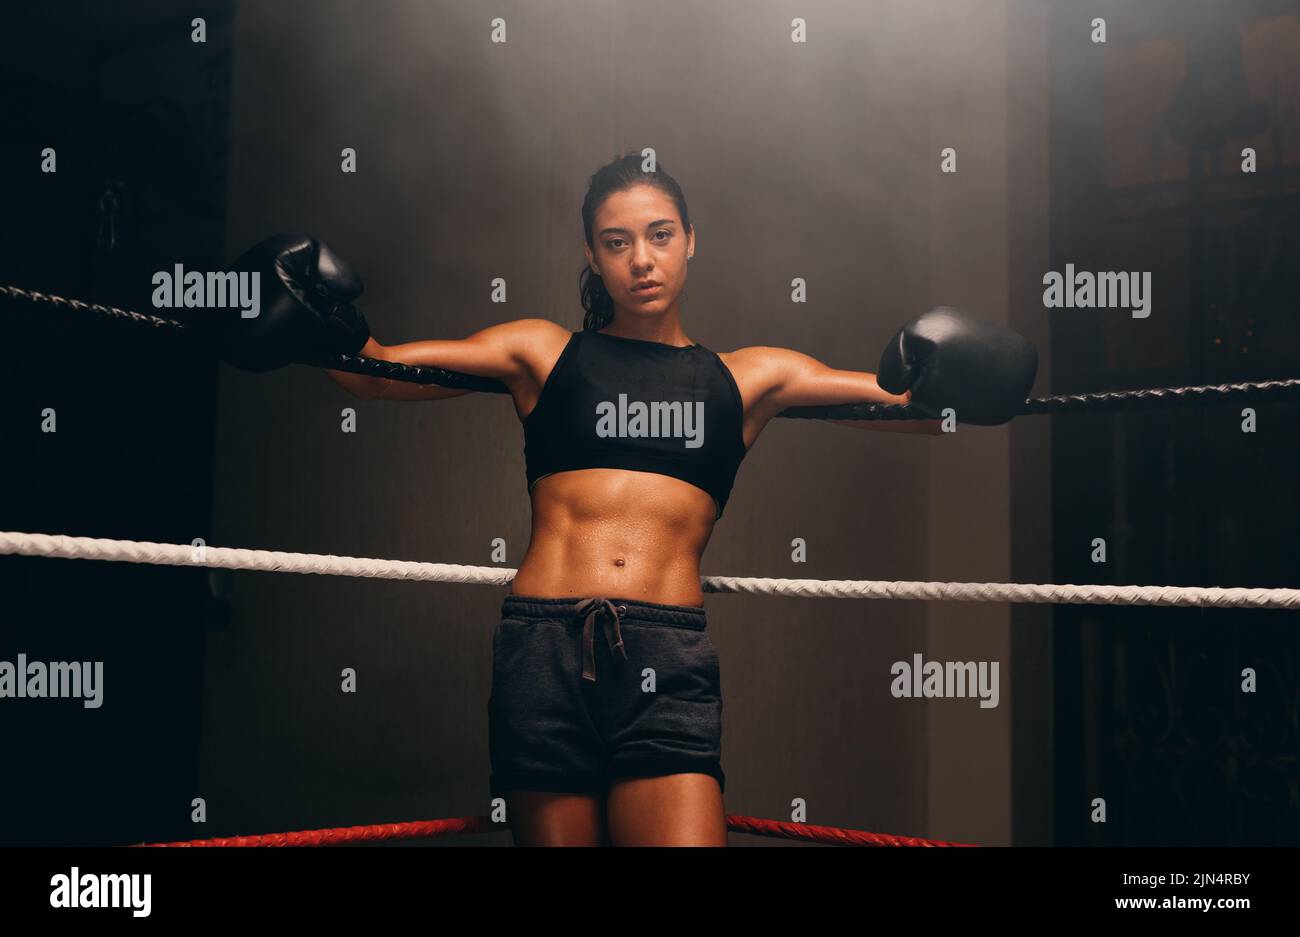 Muscular female athlete looking at the camera while leaning against the ropes of a boxing ring. Female boxer getting ready for a boxing match. Stock Photo